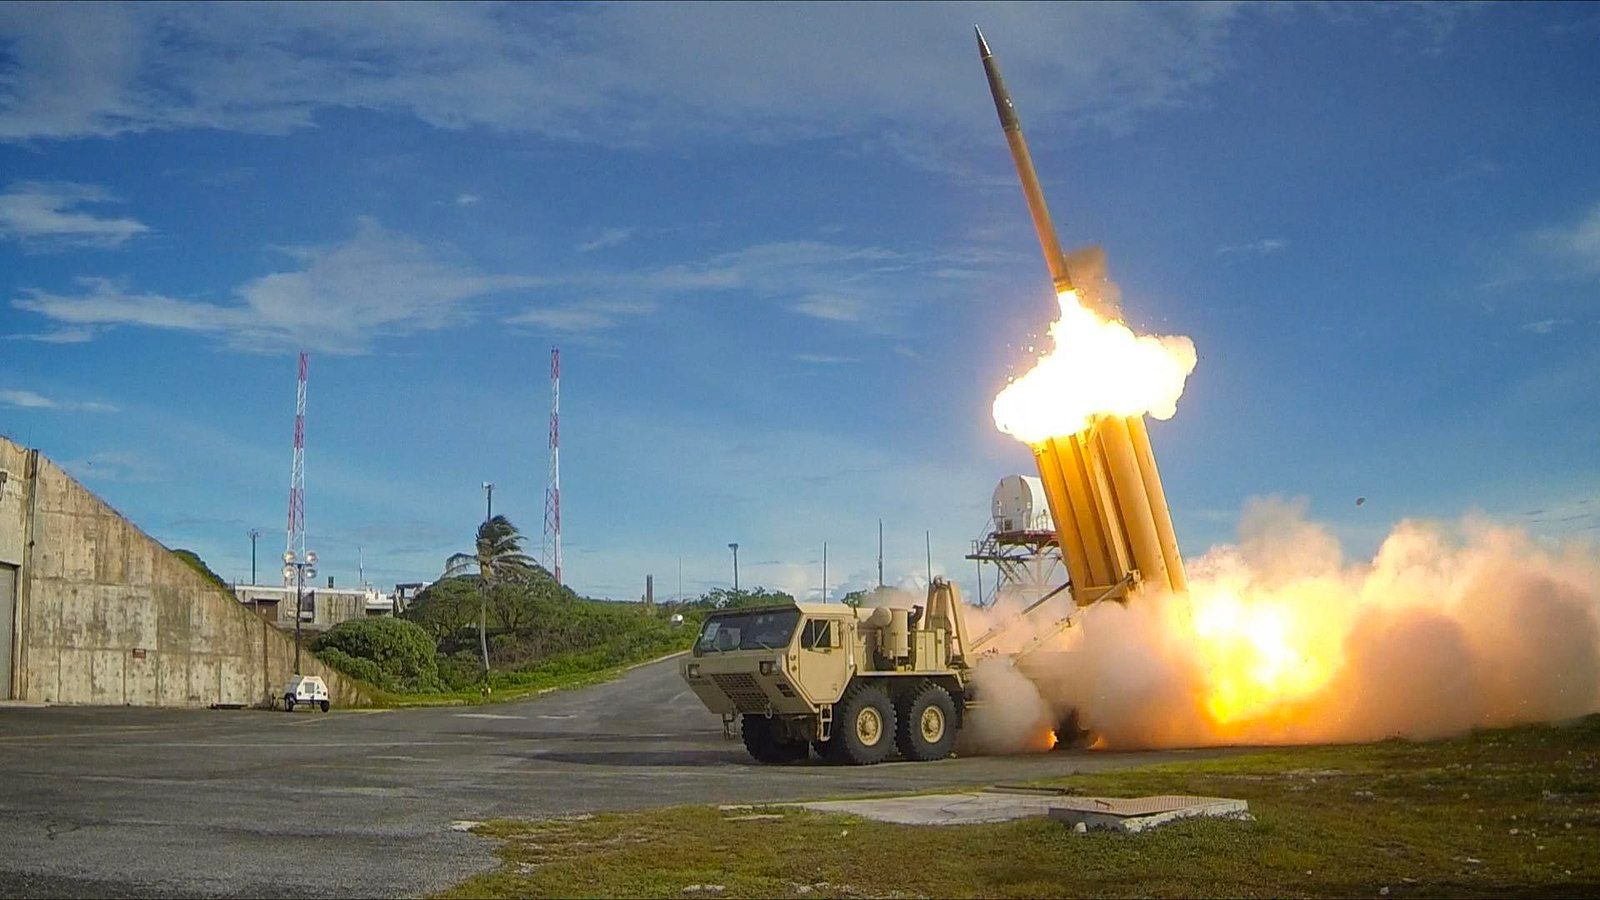 South Korea environmental impact review clears way for US missile defense system